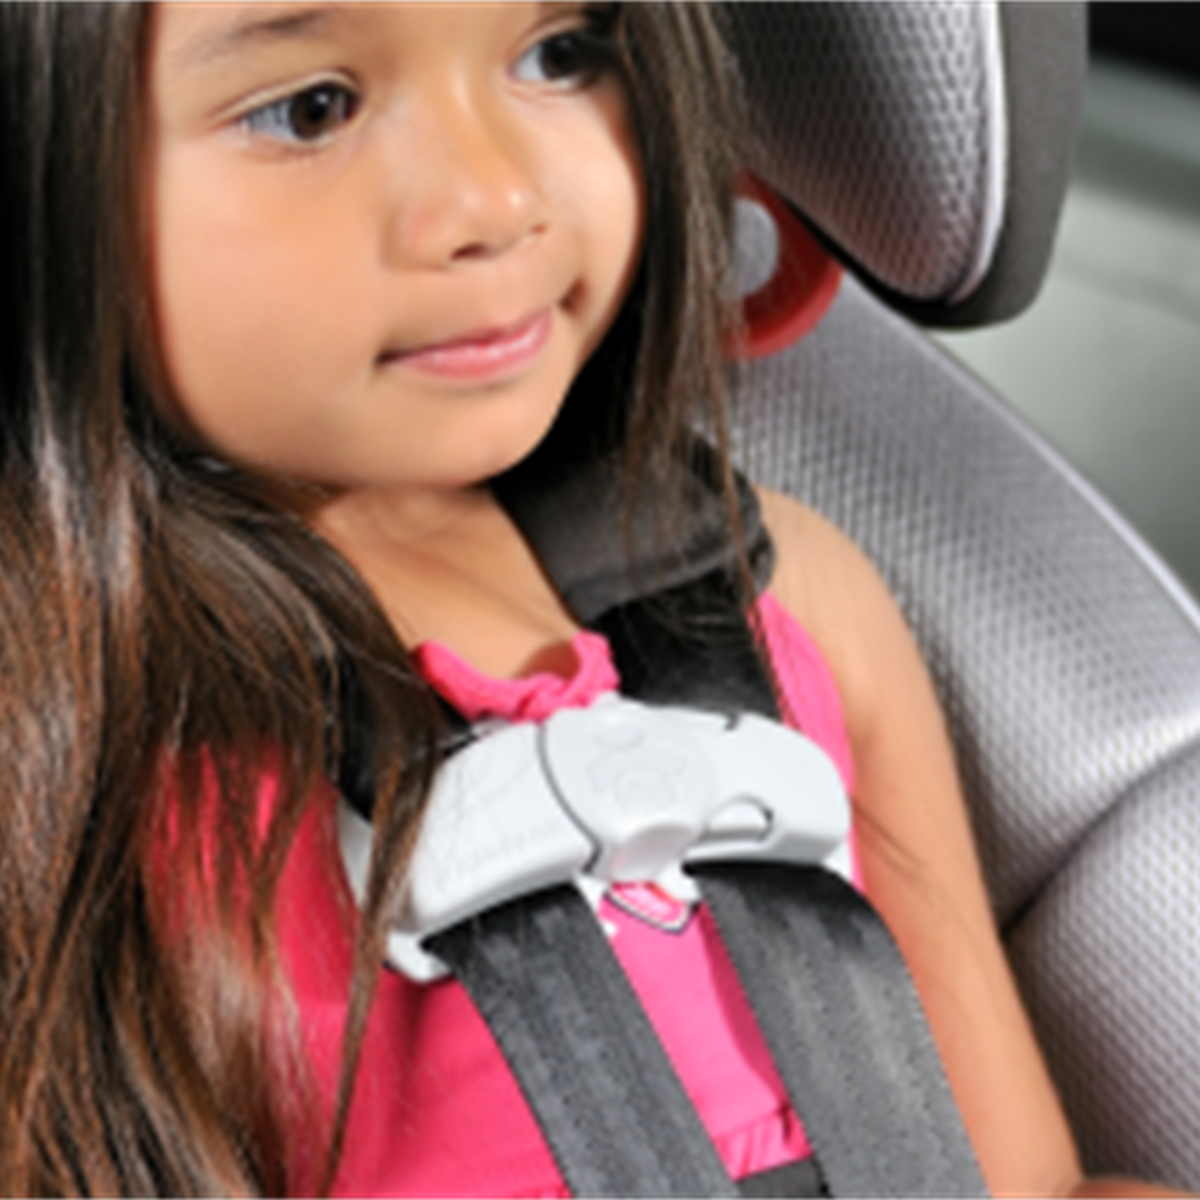 Car Seats Information For Families, What Do The Groups Mean For Child Car Seats